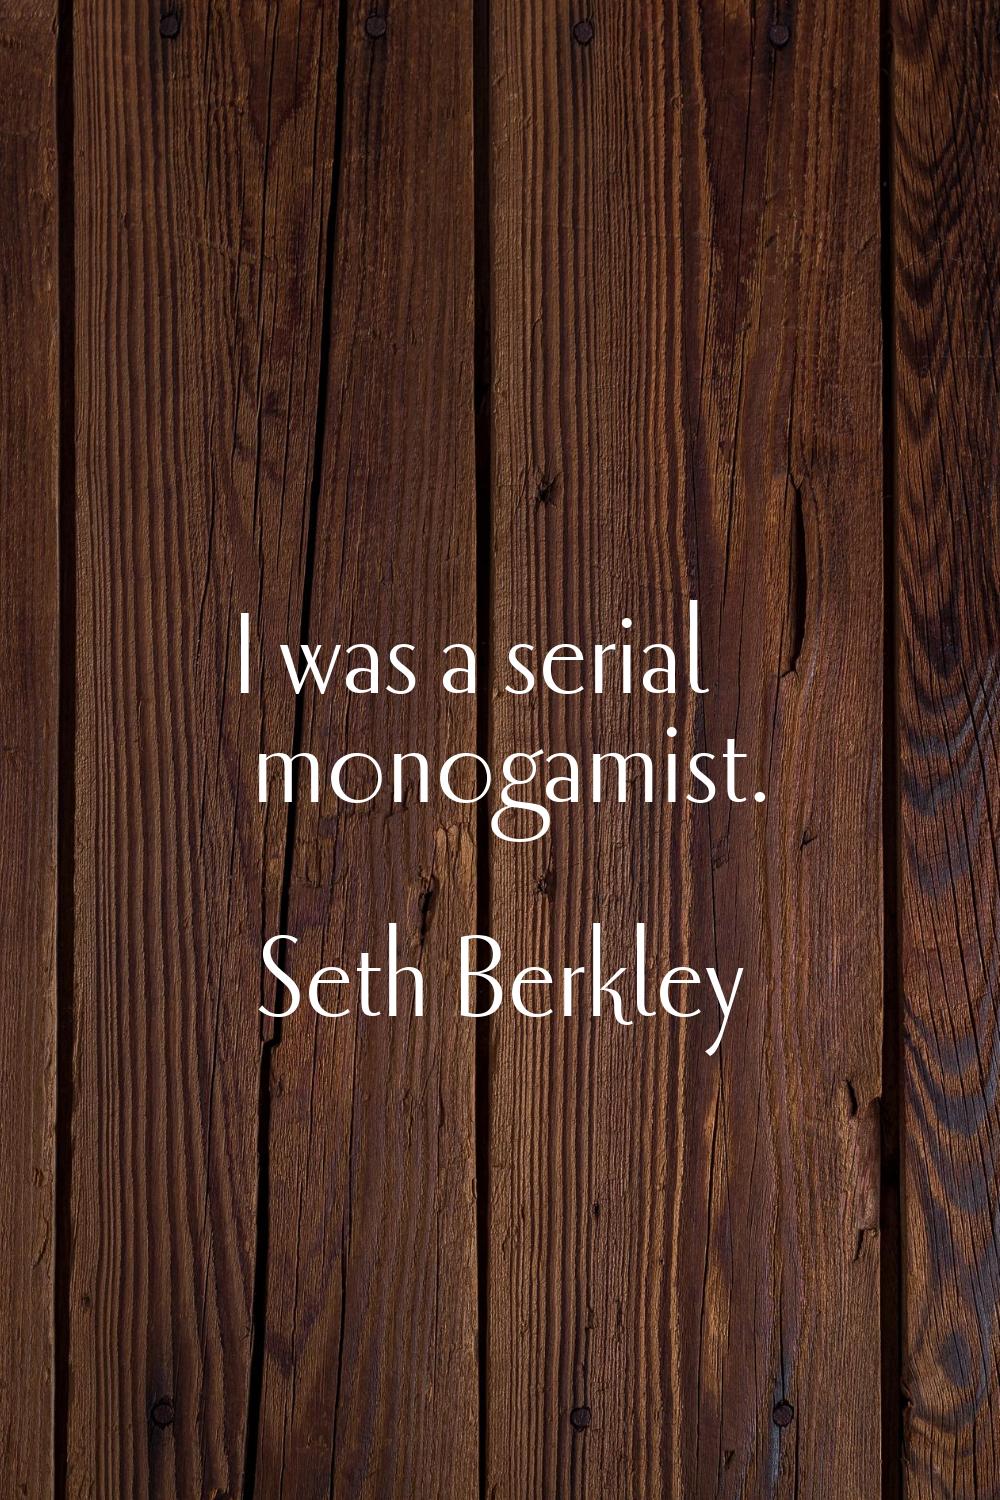 I was a serial monogamist.